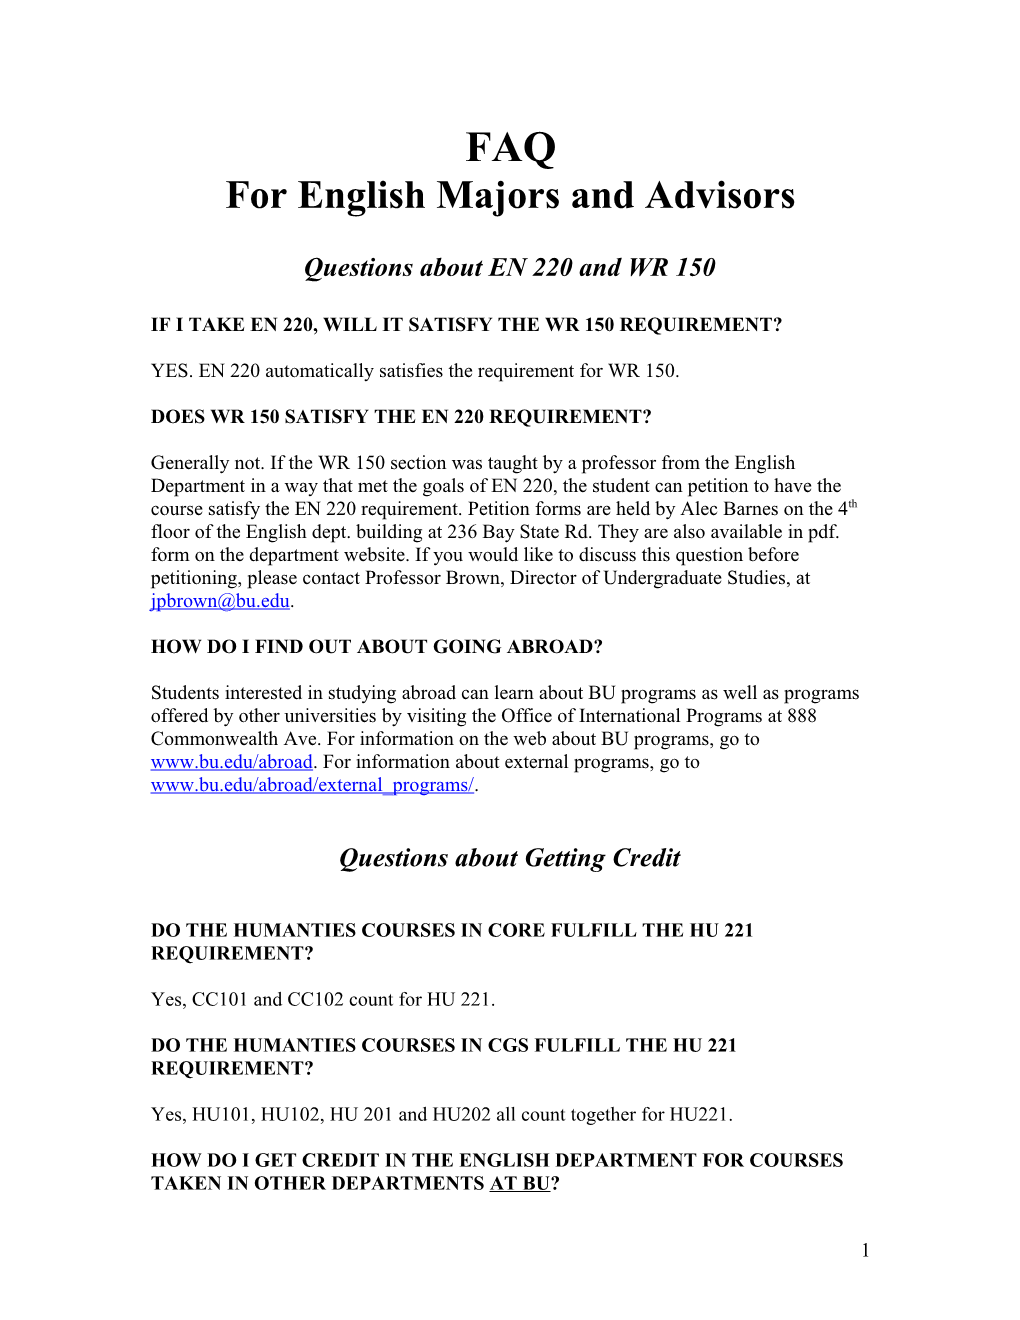 For English Majors and Advisors